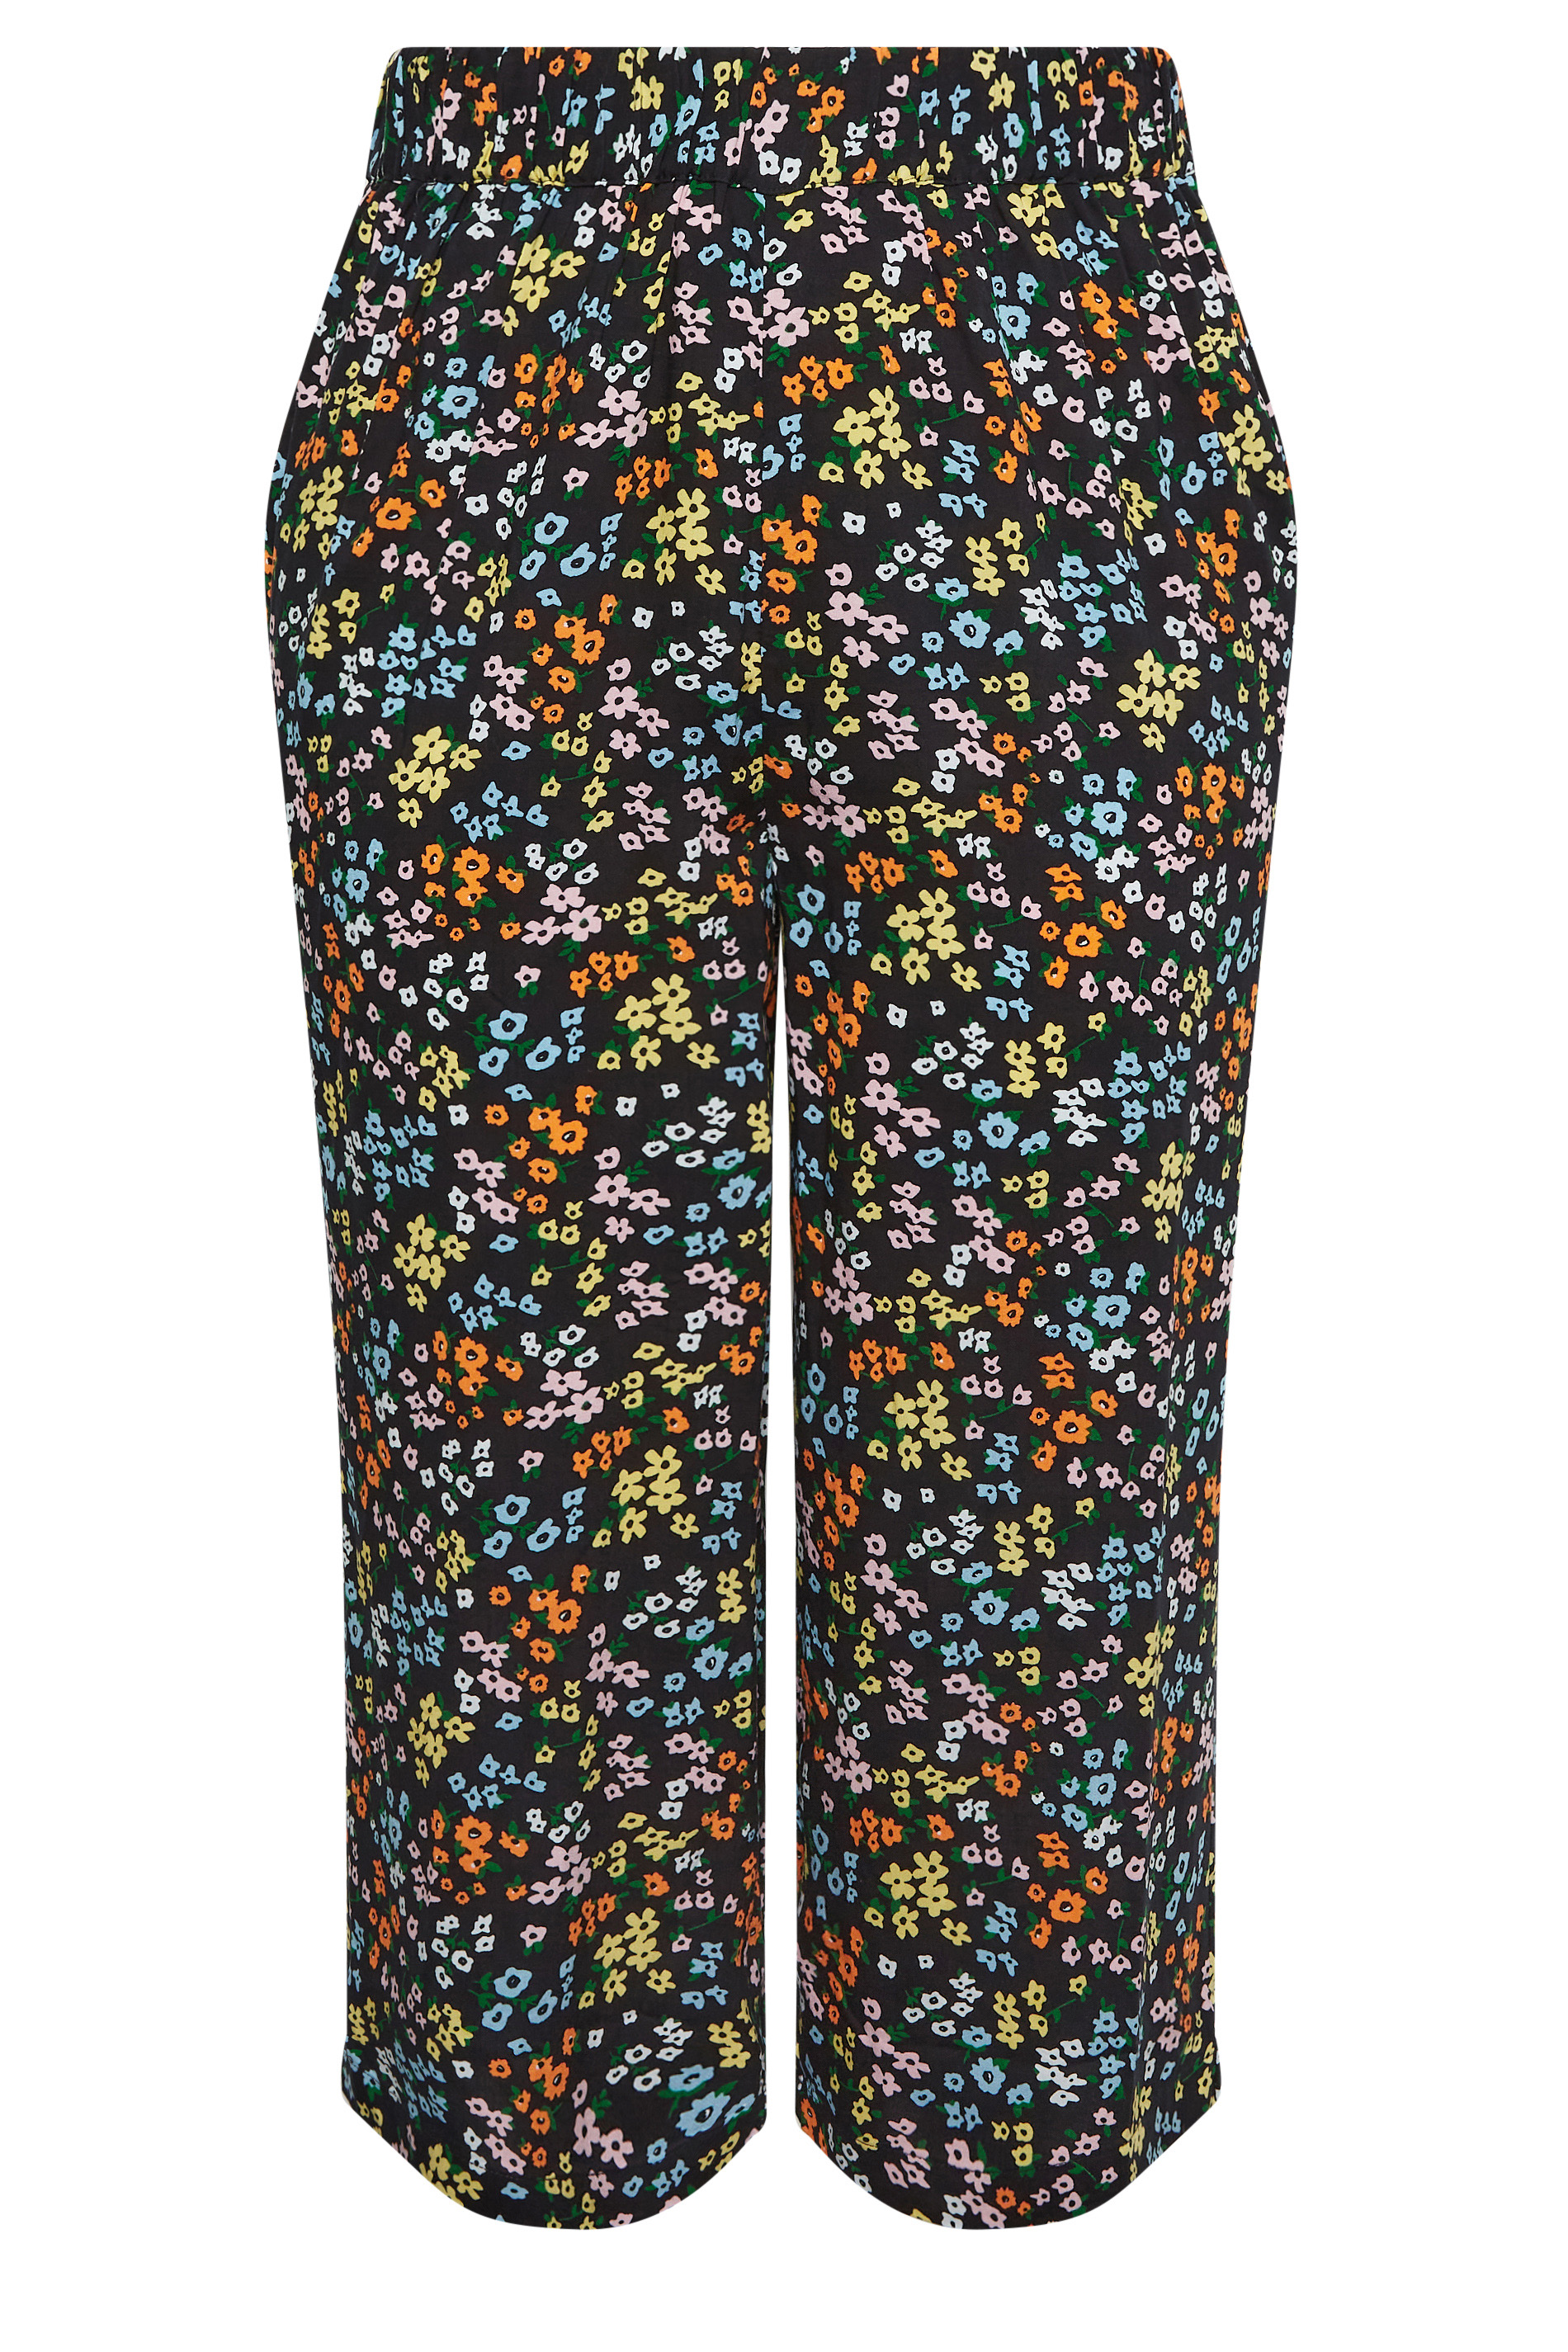 Mia Slim Floral Cropped Trousers | M&S Collection | M&S